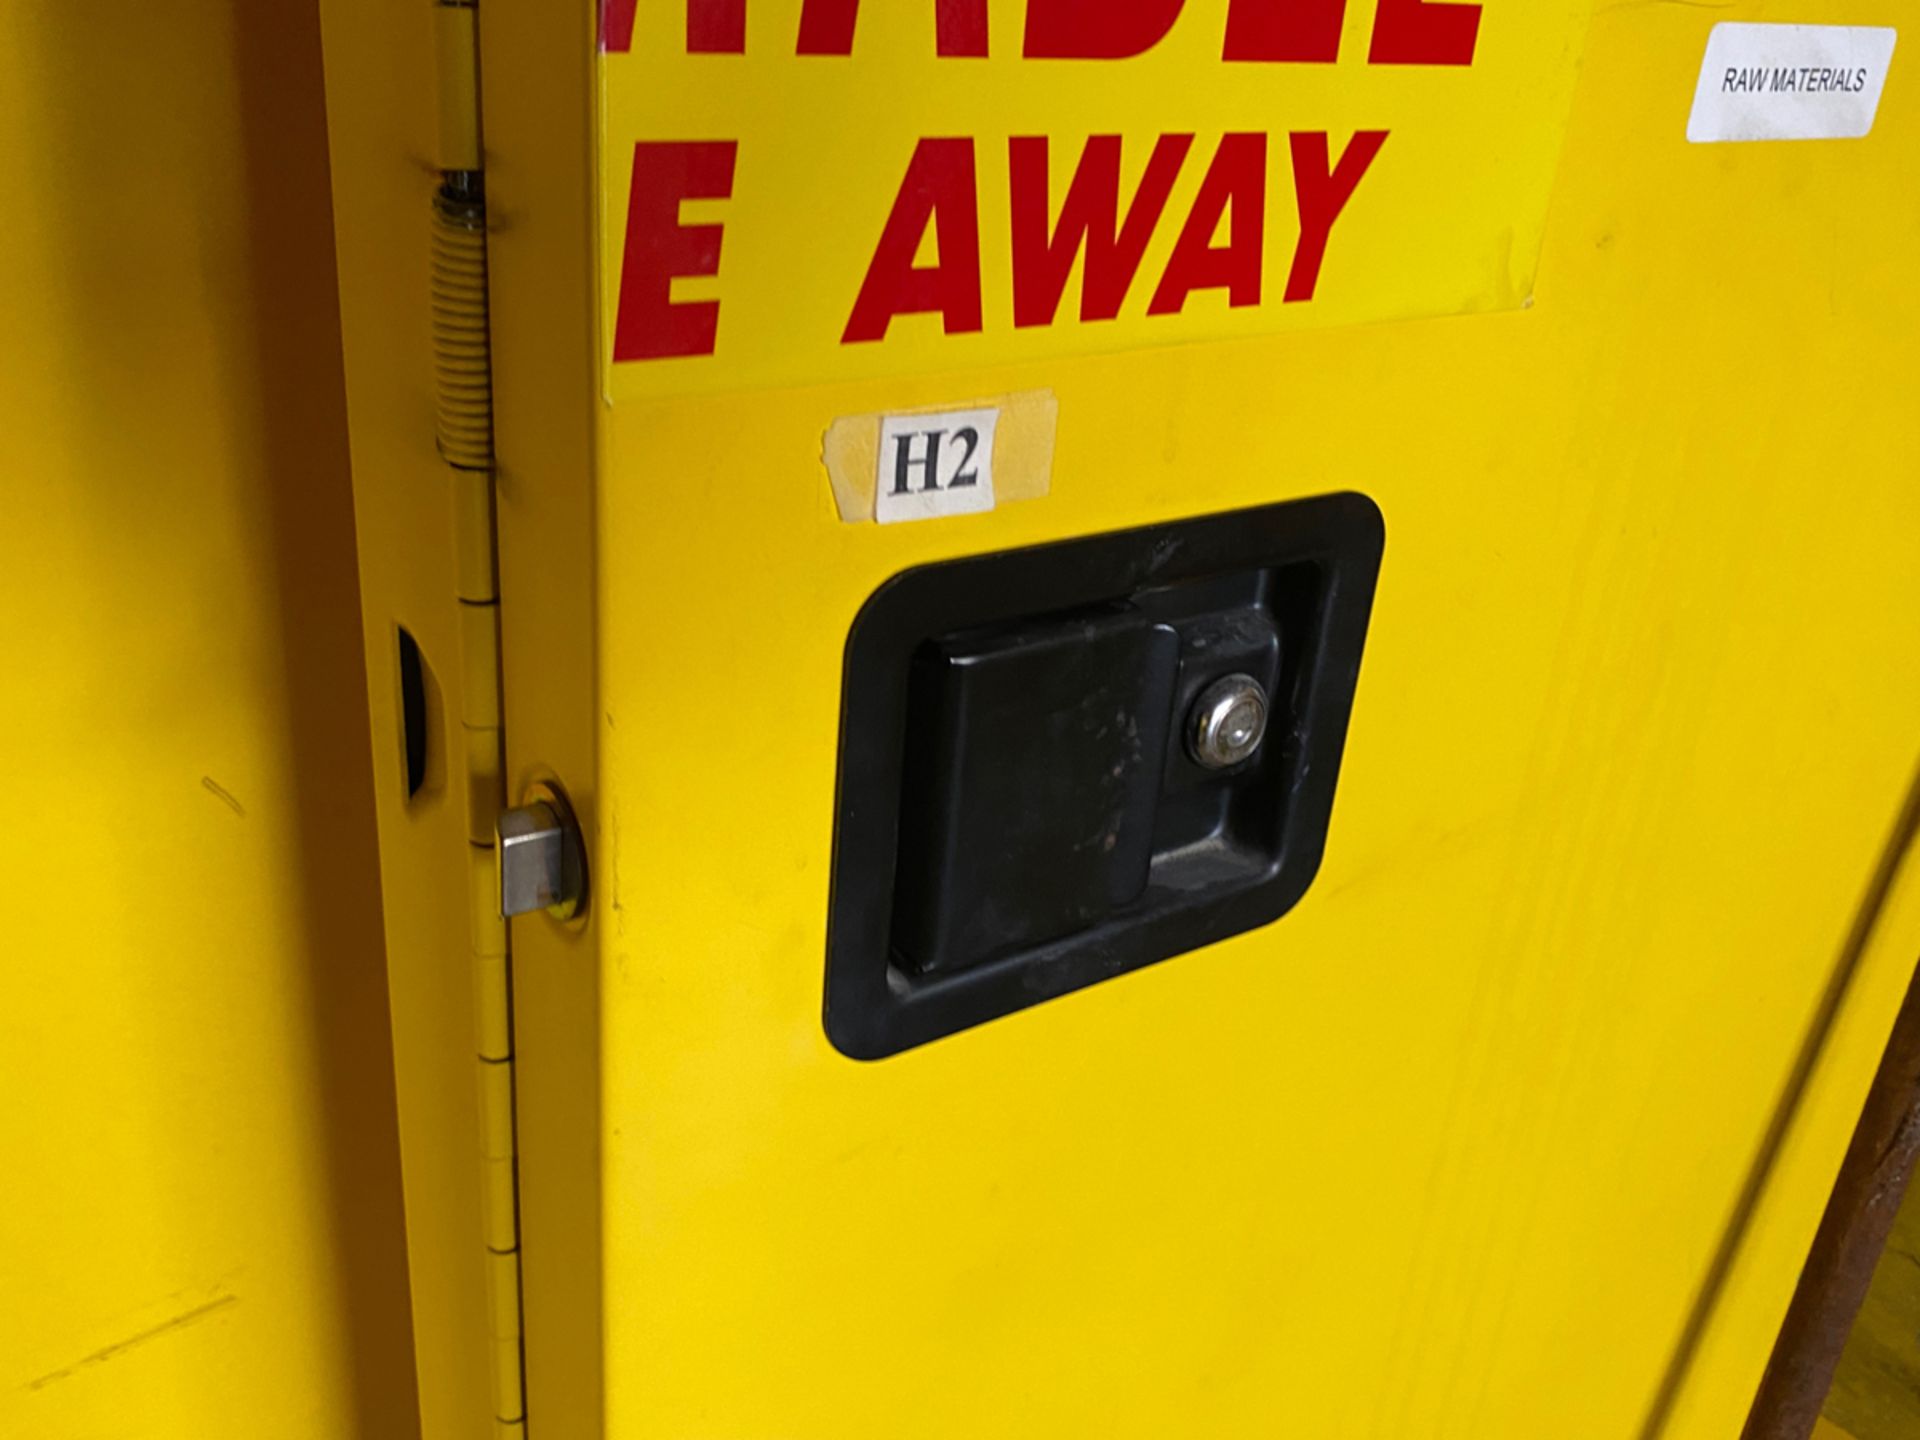 Flammable Liquid Safety Storage Cabinet - Image 4 of 4